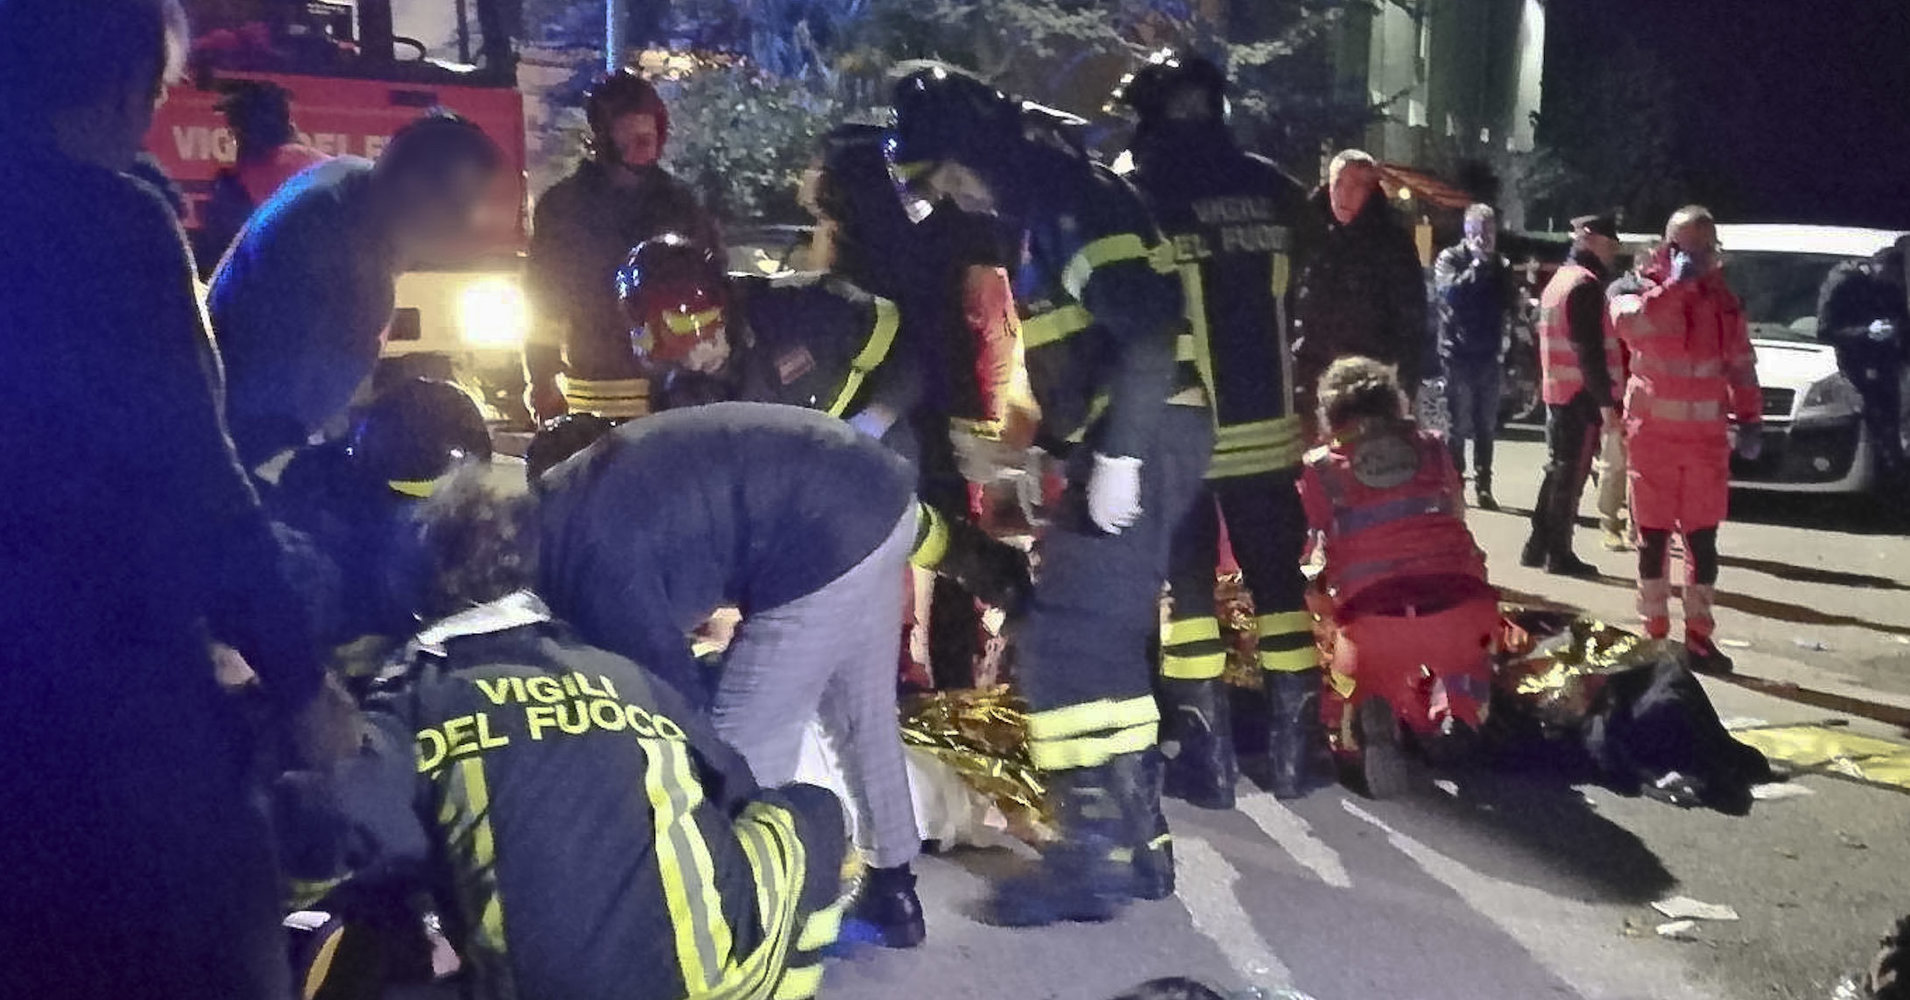 6 Dead And Dozens Injured Following Stampede At Italian Nightclub